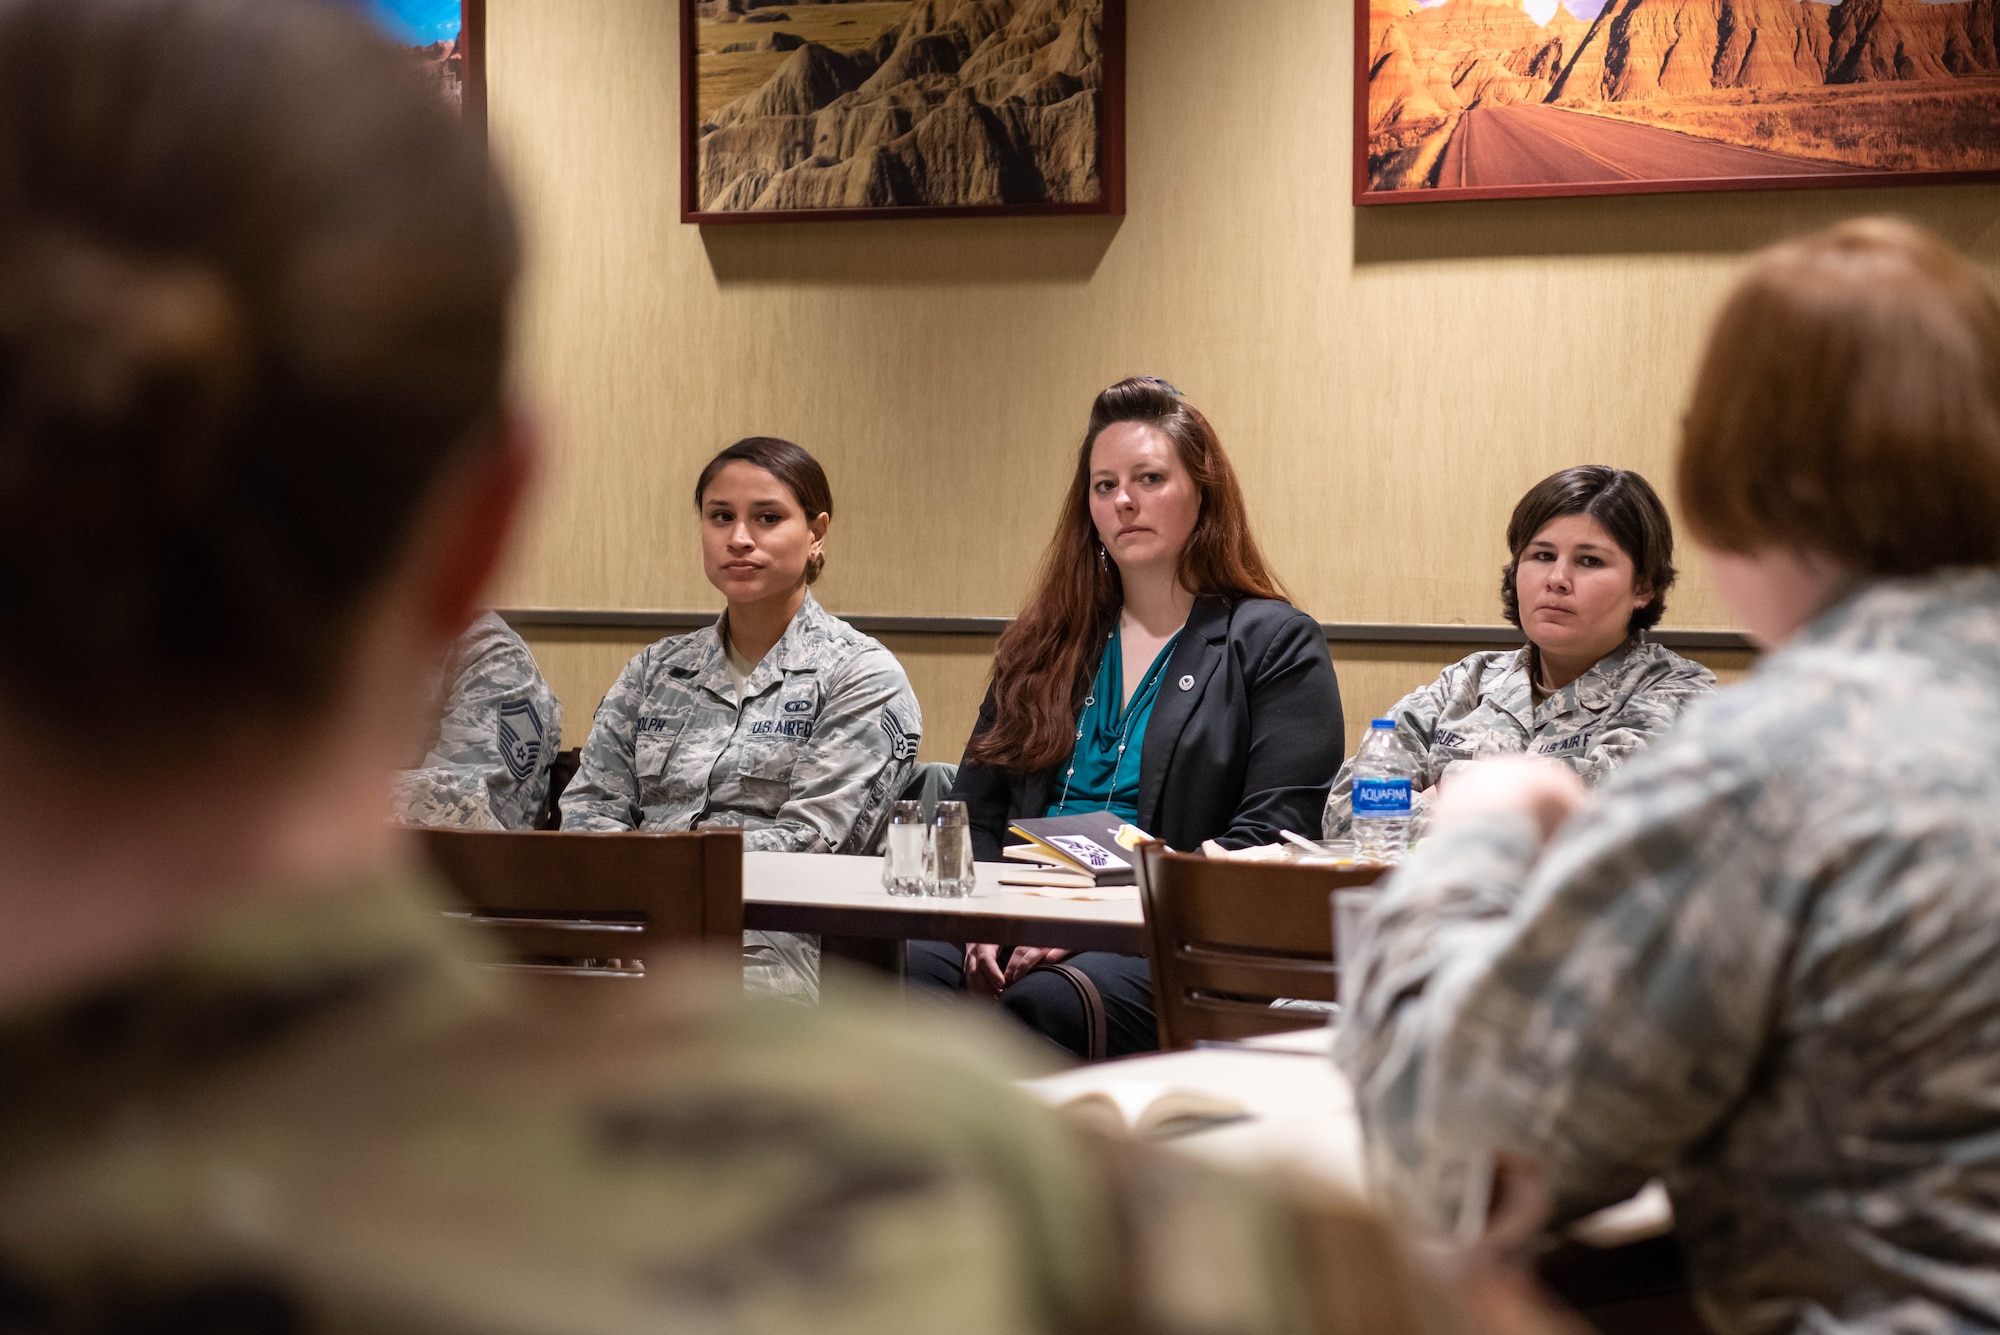 Base members speak at the 28th Bomb Wing Women’s Lean In Circle in the Raider Café conference room on Ellsworth Air Force Base, S.D., March 26, 2019. Both men and women serving on Ellsworth AFB were invited to attend to discuss and break down barriers to success and happiness that are based on gender. Col. Sarah Deaver, the 28th Mission Support Group commander, was the keynote speaker for the event. (U.S. Air Force photo by Tech. Sgt. Jette Carr)